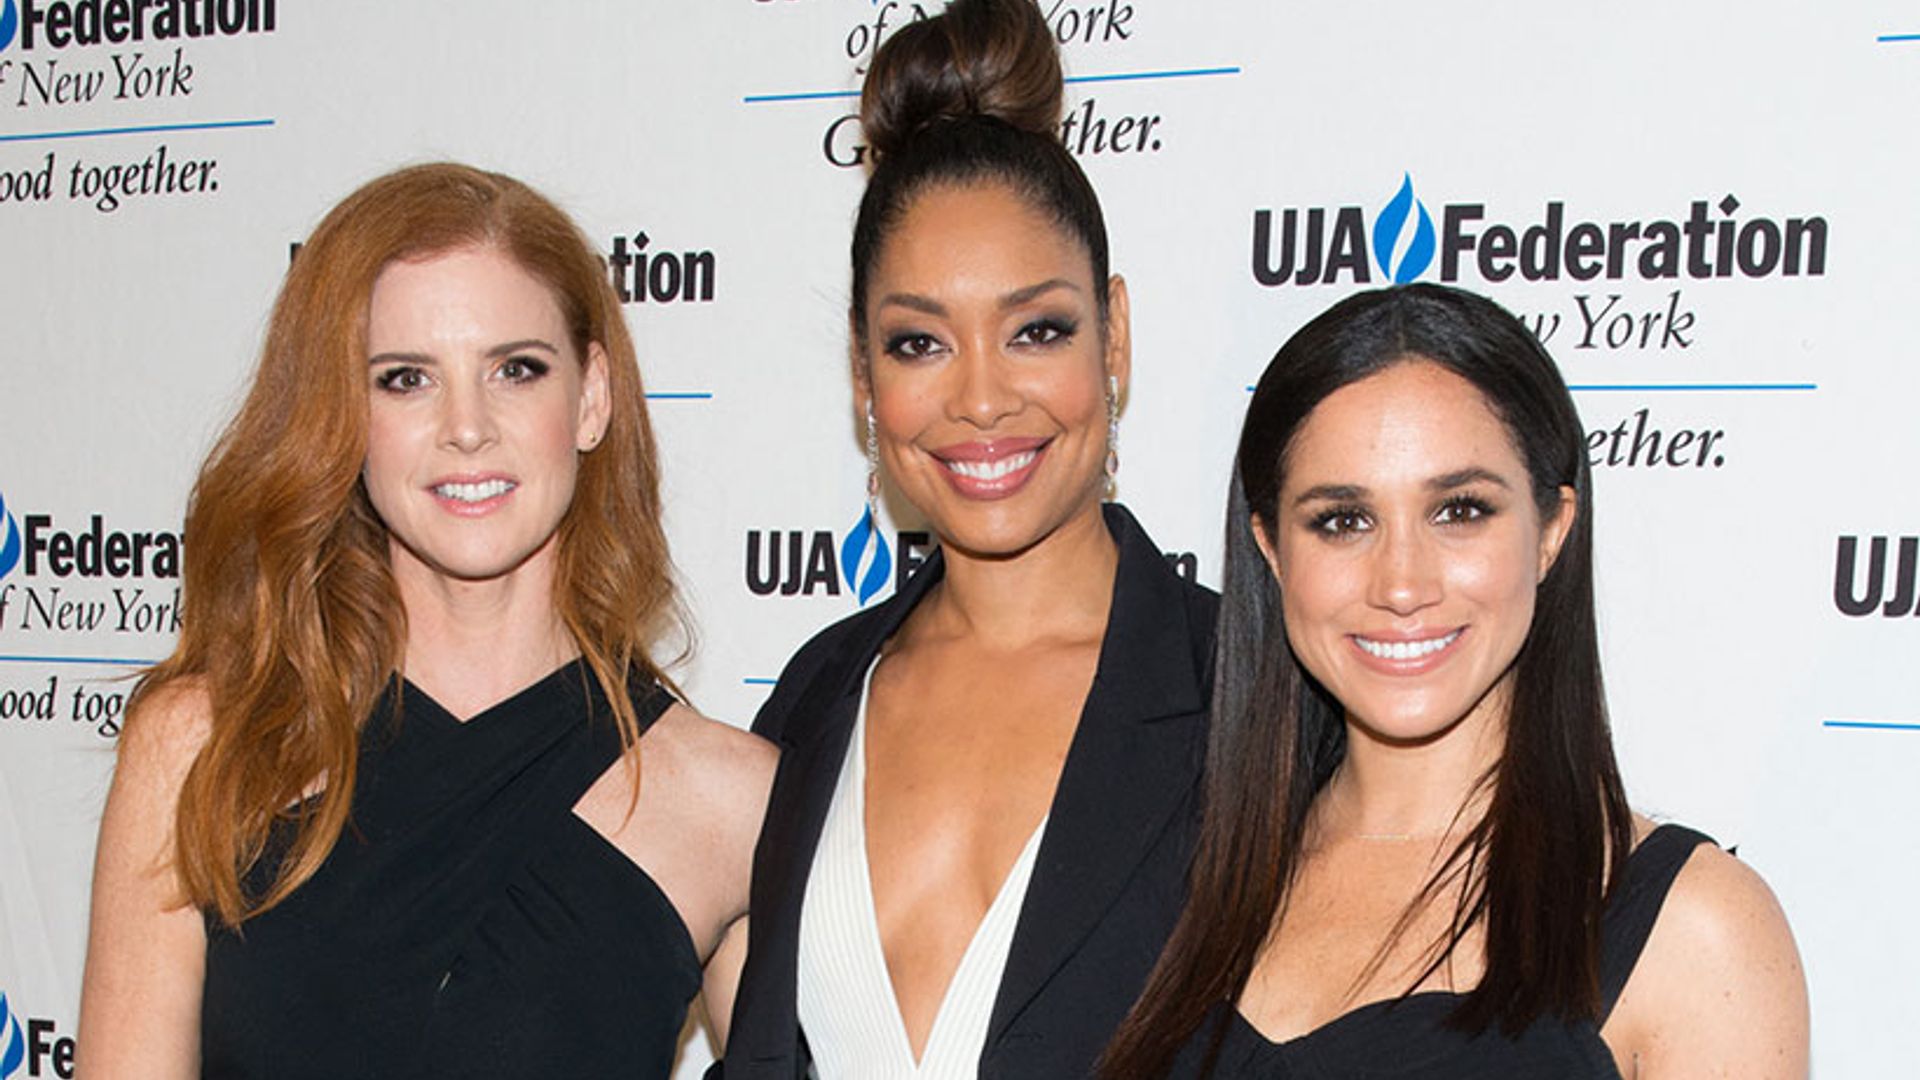 Meghan Markle's best friends reunite for something really exciting